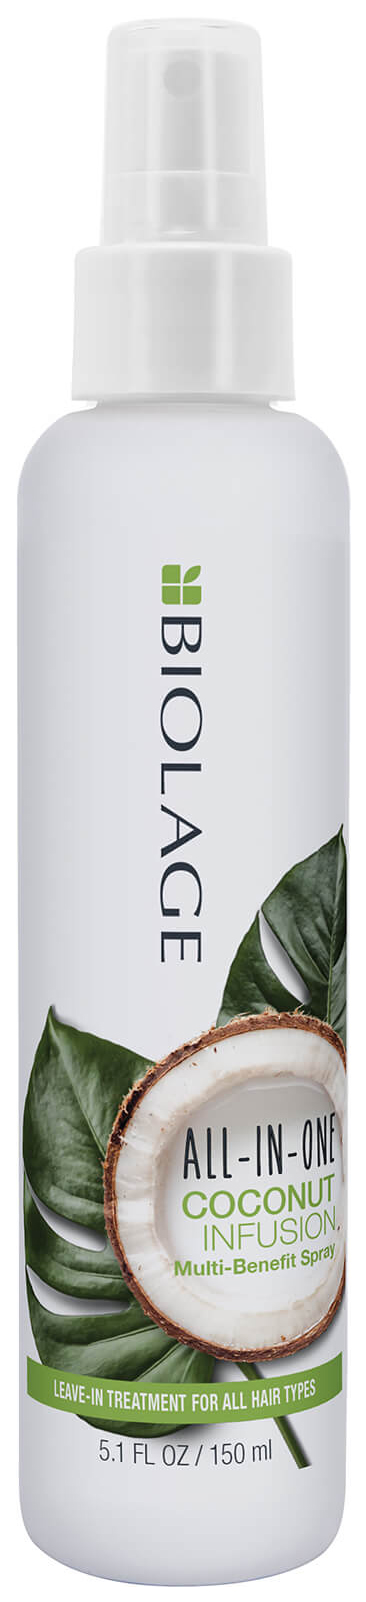 Спрей для волос Biolage All-In-One Coconut Infusion Multi-Benefit Spray 150 мл infusion velours